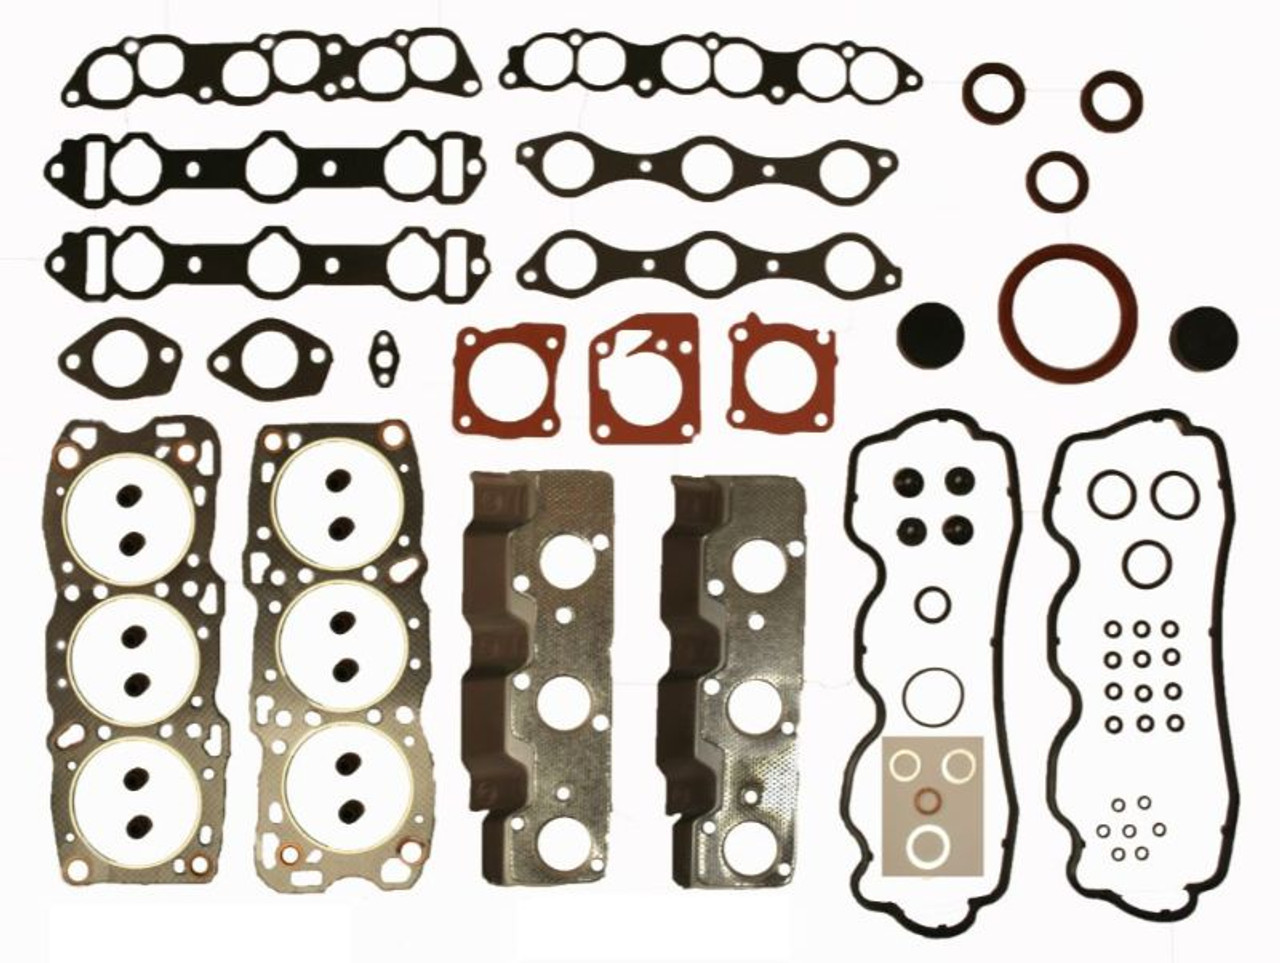 1987 Plymouth Voyager 3.0L Engine Gasket Set CR3.0-49 -5